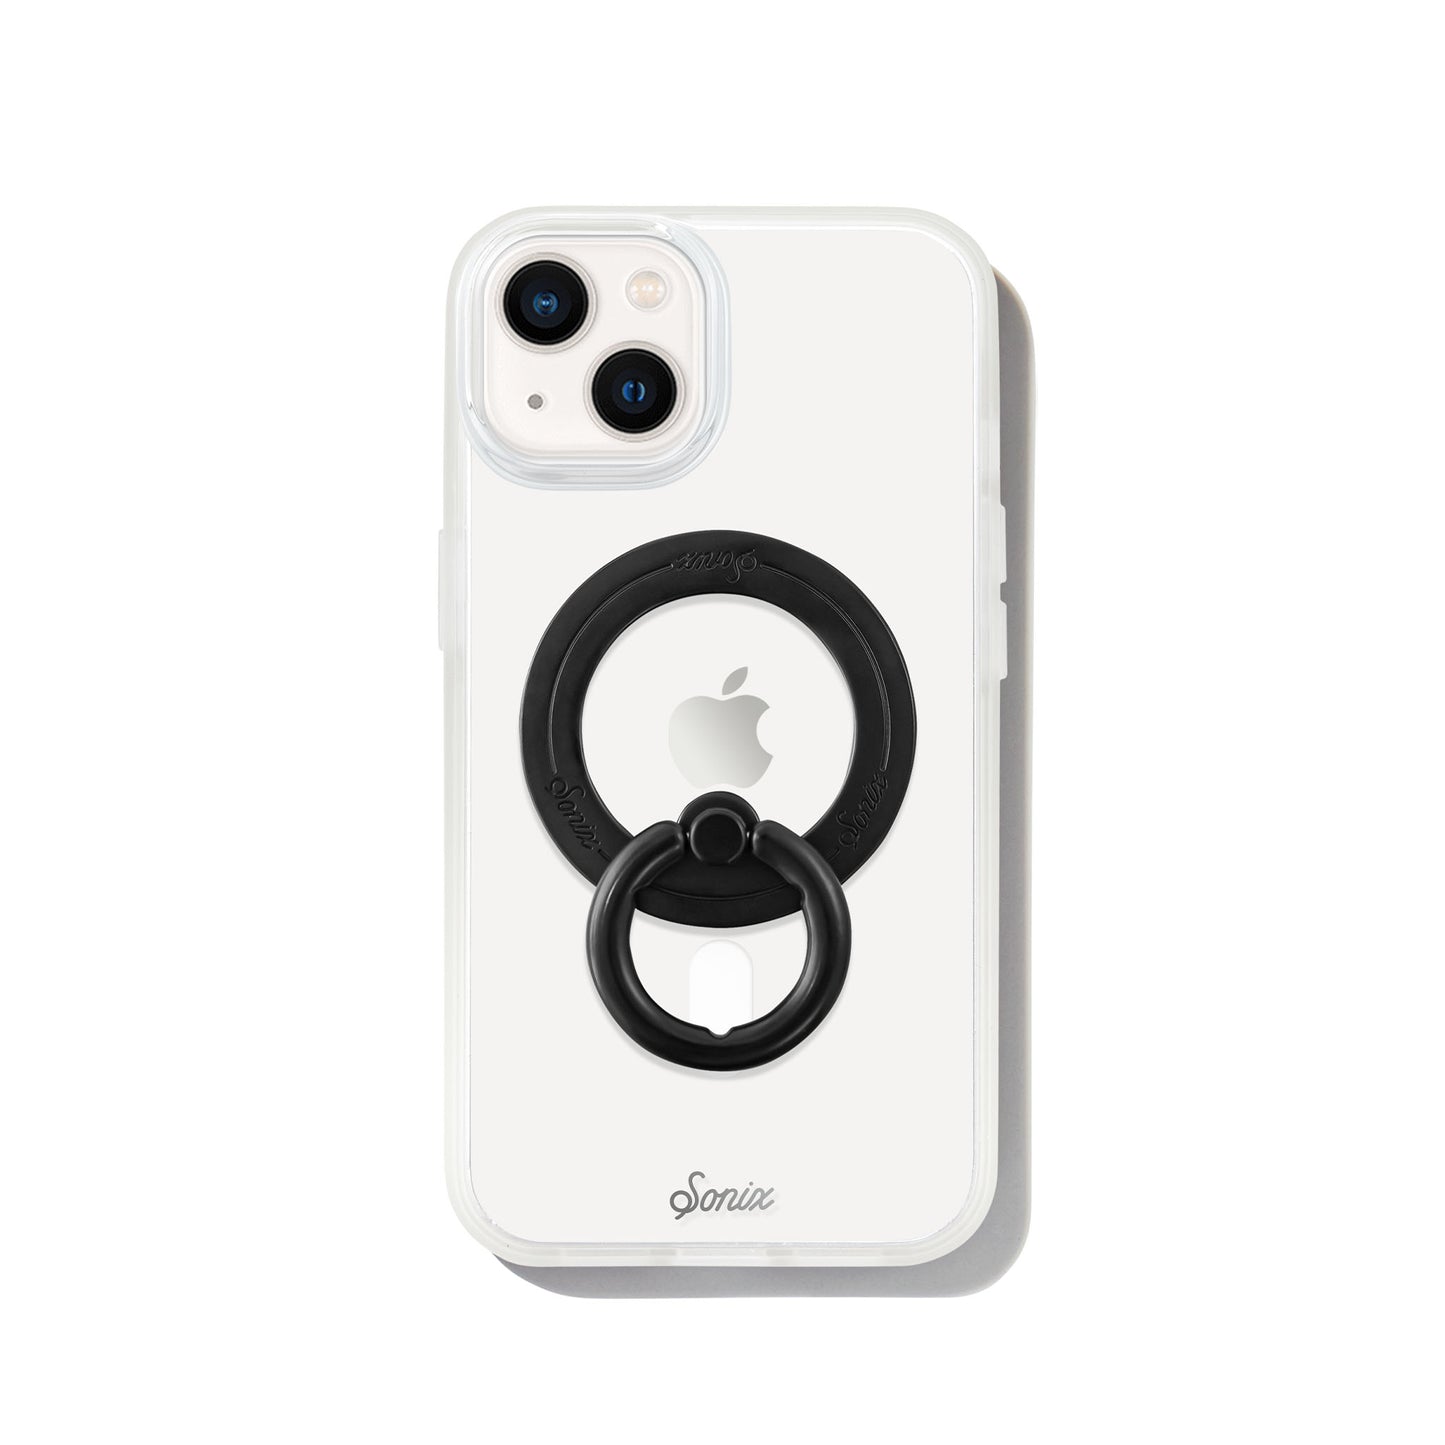 Magnetic Removable Phone Ring